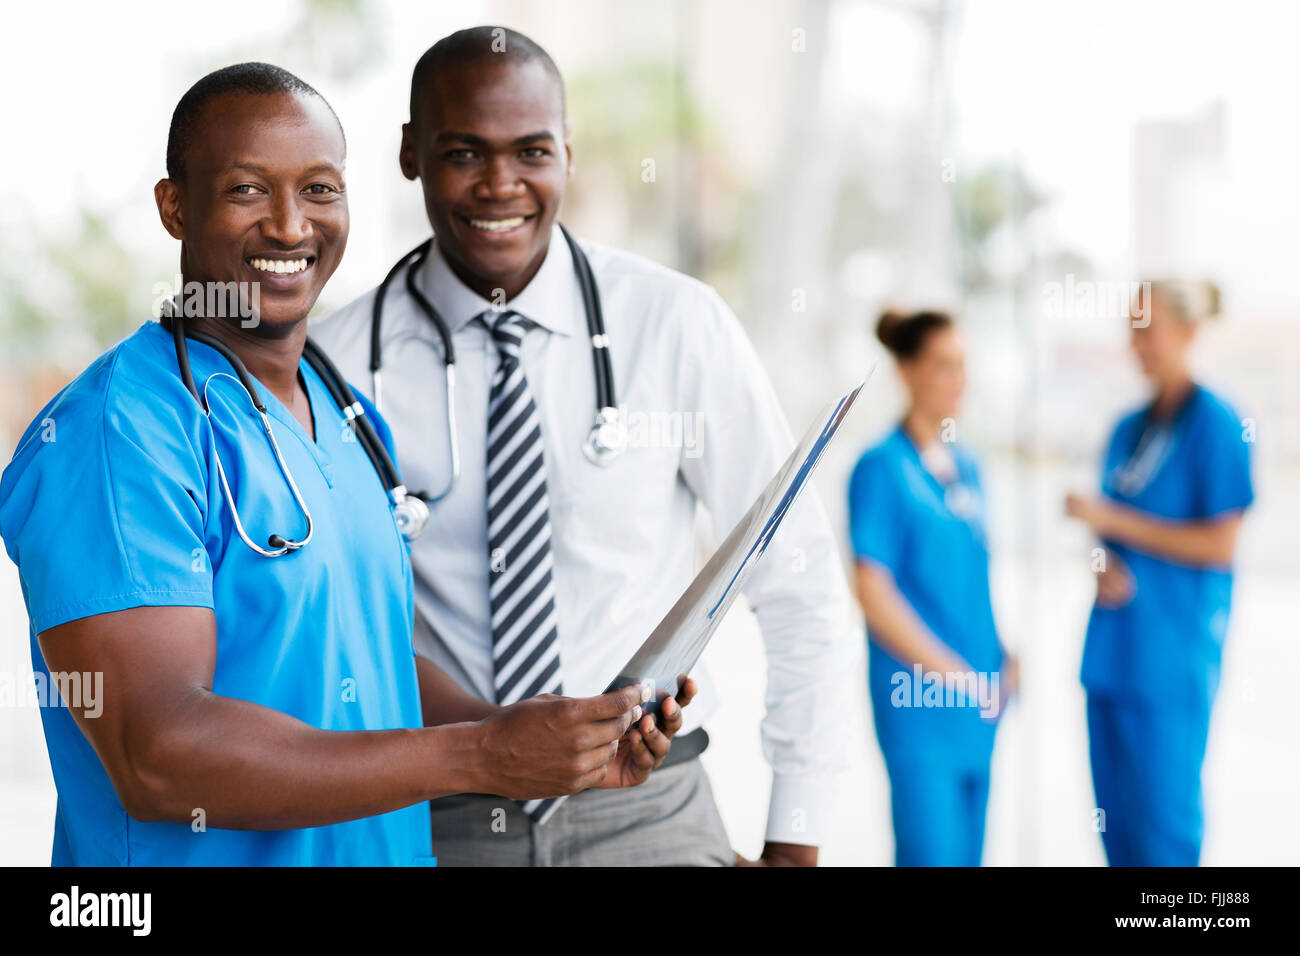 portrait of African American medical workers working together Stock Photo